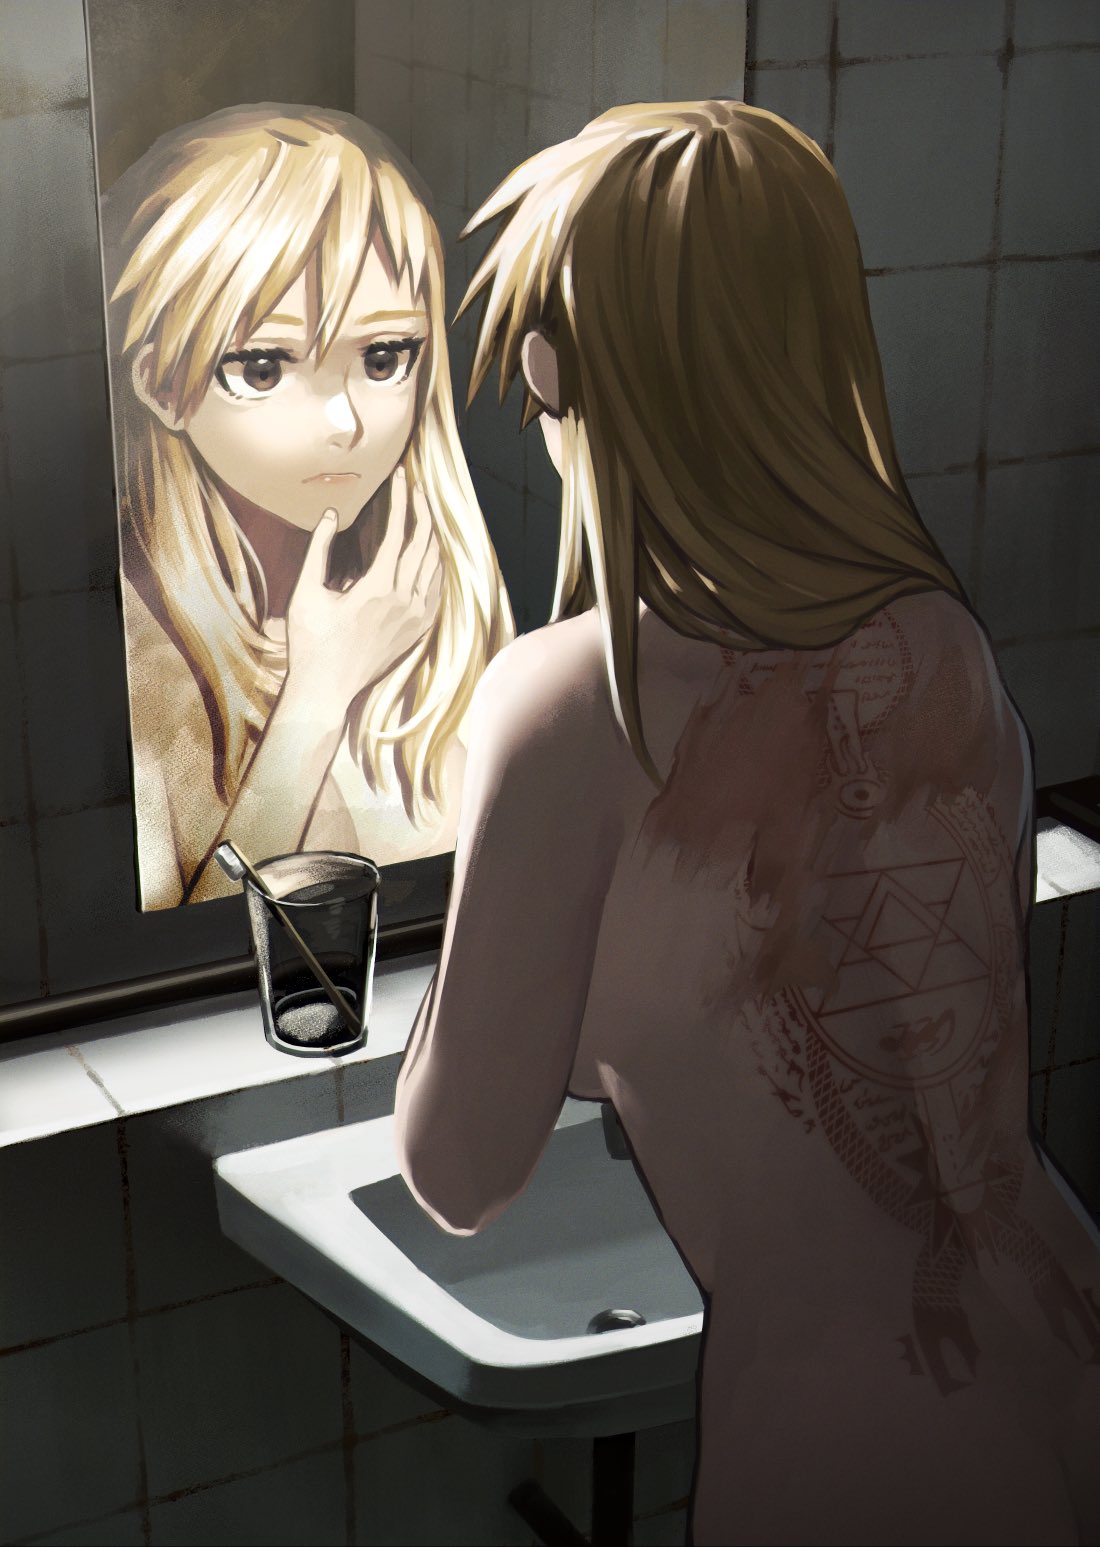 1girl back_tattoo bangs bathroom blonde_hair brown_eyes burn_scar closed_mouth cup fullmetal_alchemist hair_down hand_up highres long_hair looking_at_mirror mame_moyashi mirror nude reflection scar scar_on_back sink solo tattoo toothbrush